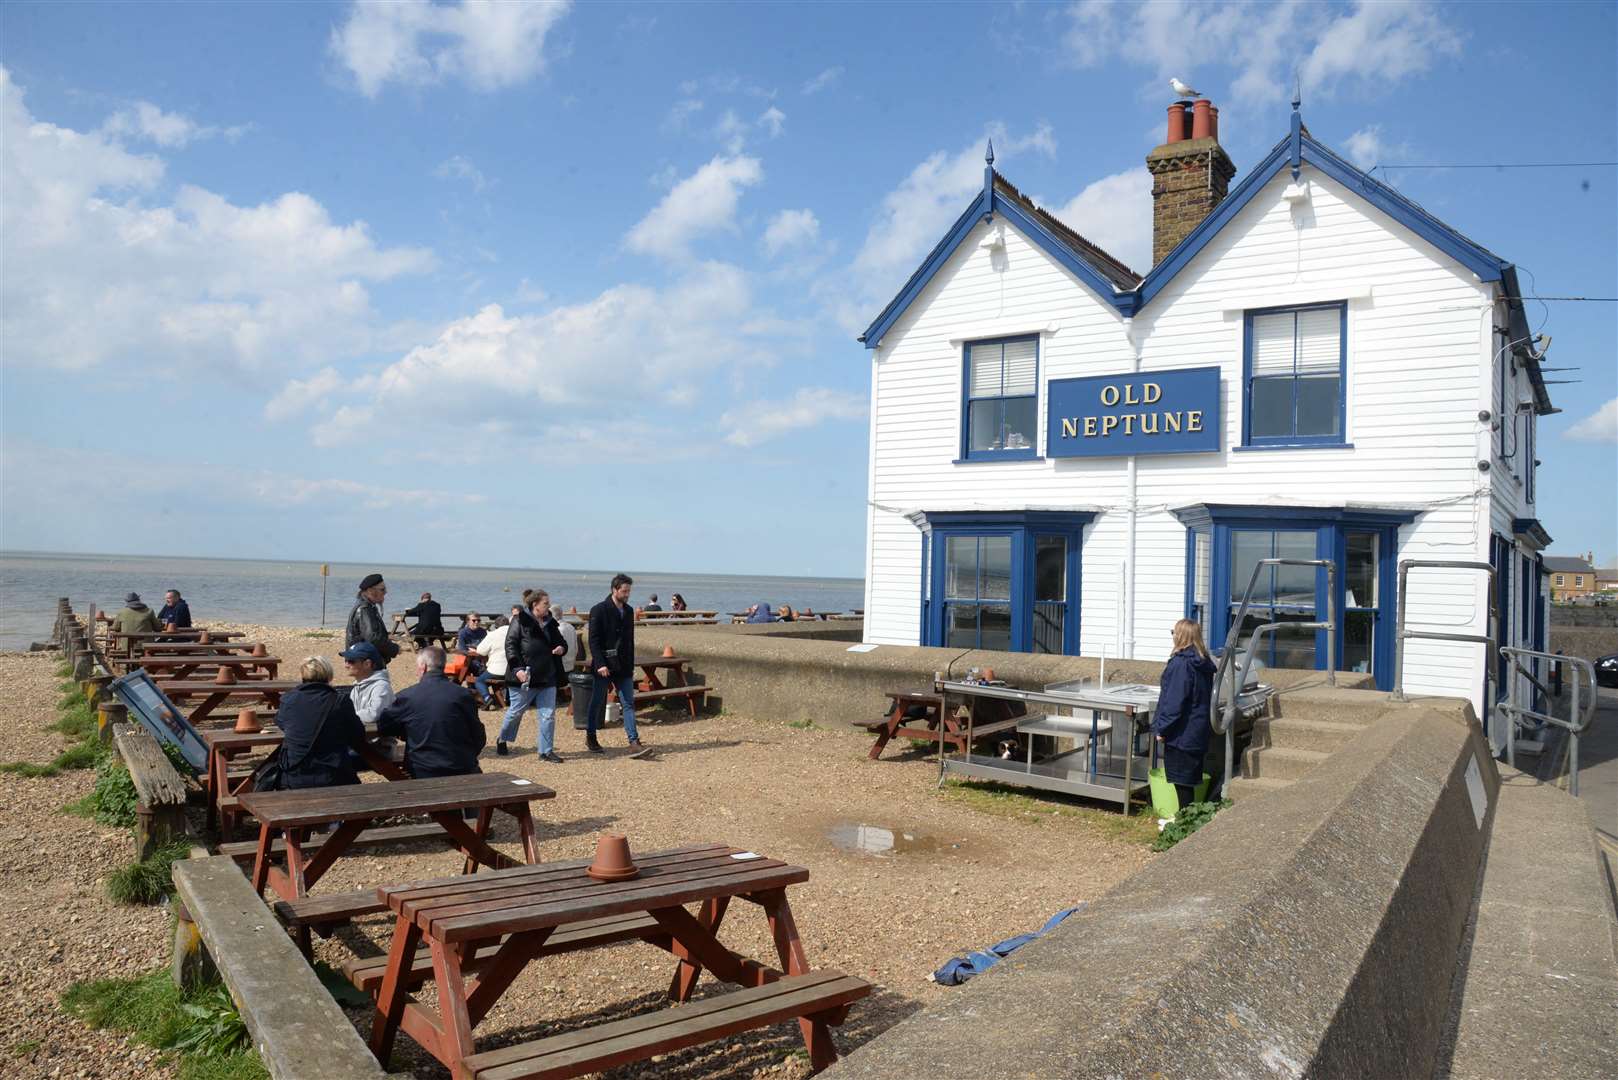 The Old Neptune on the beach at Whitstable - now featuring on the ale which carries the town's name